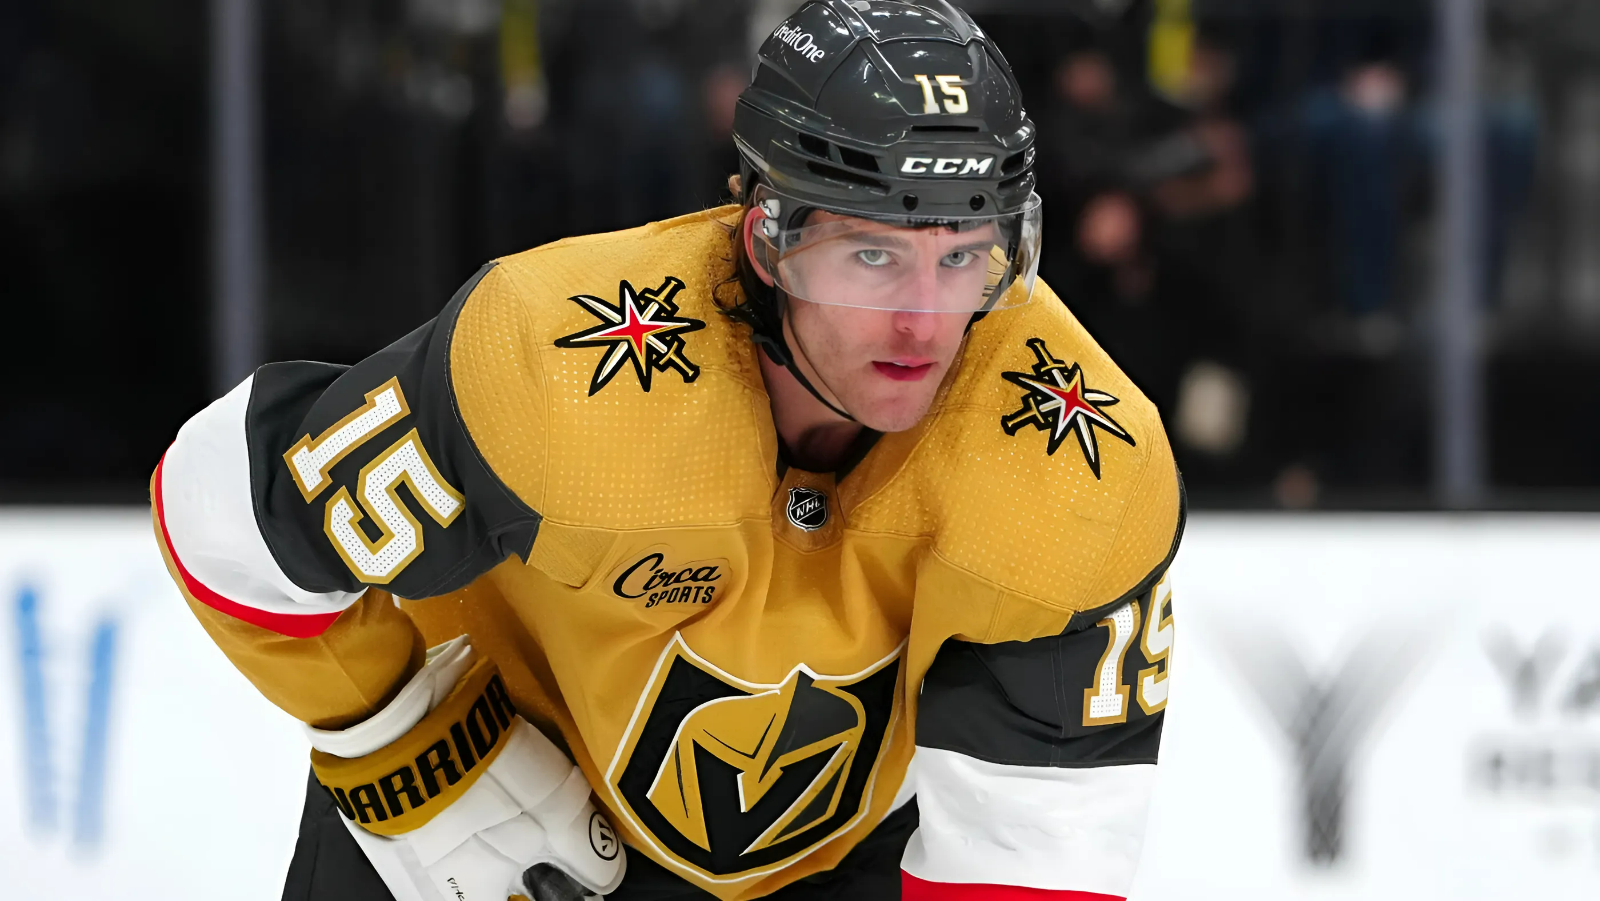 Noah Hanifin Delivers As Expected for Golden Knights